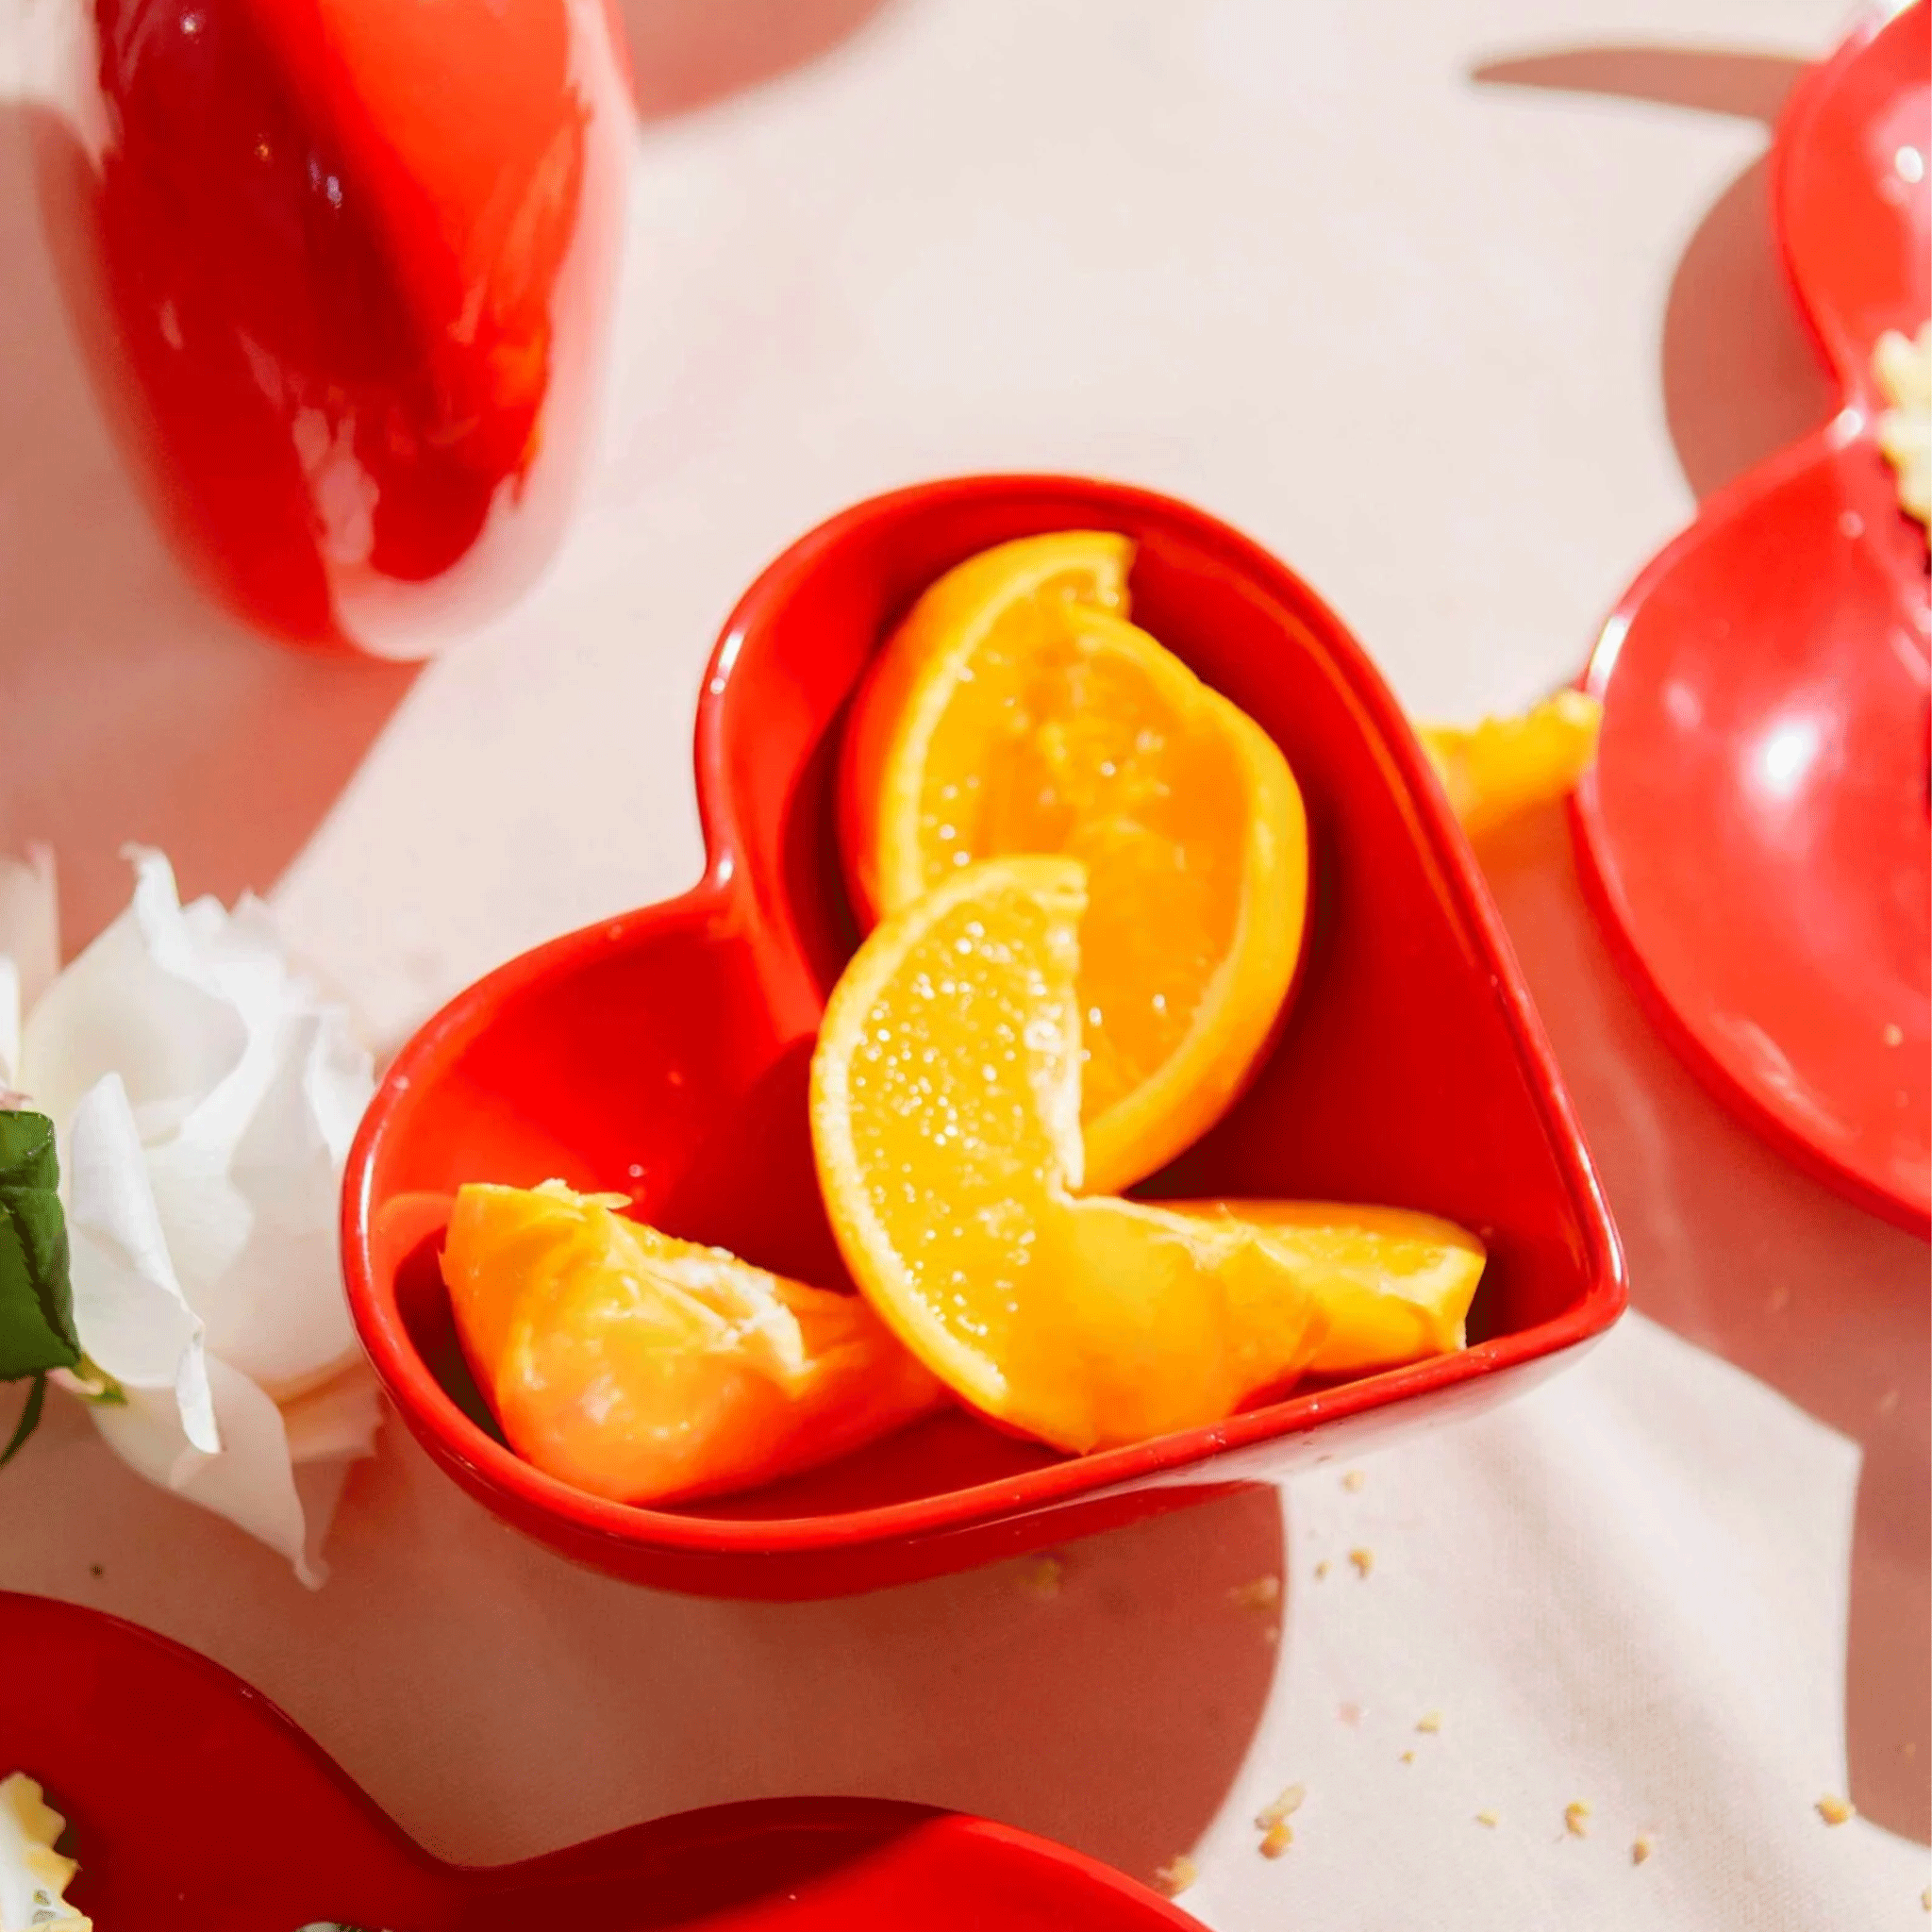 A red ceramic heart shaped bowl holding sliced oranges. 